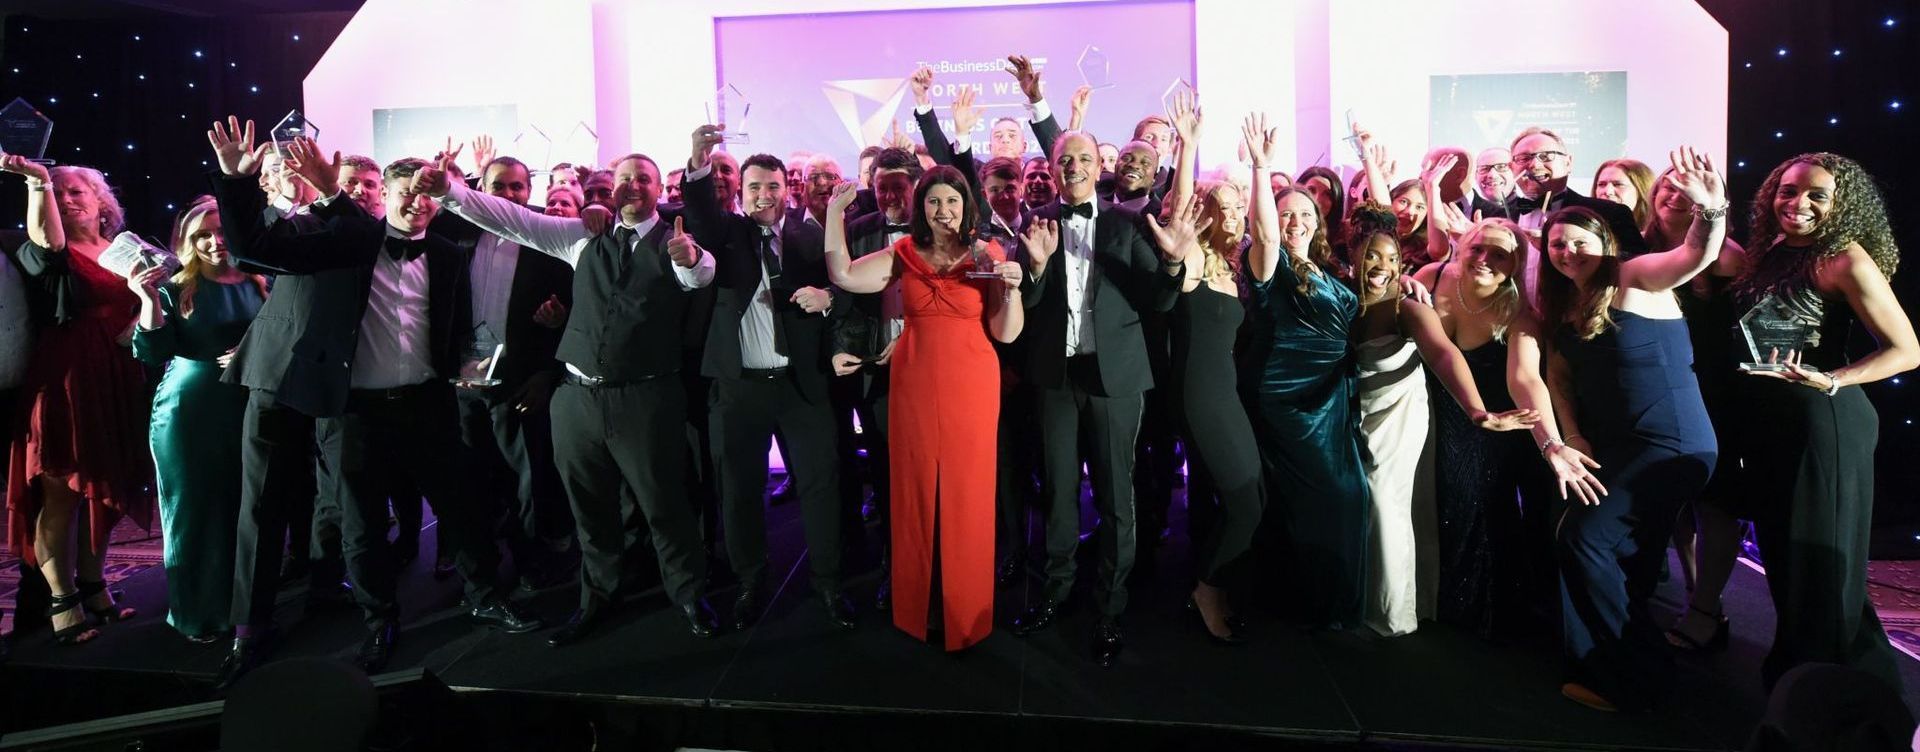 North West Business Award Winners